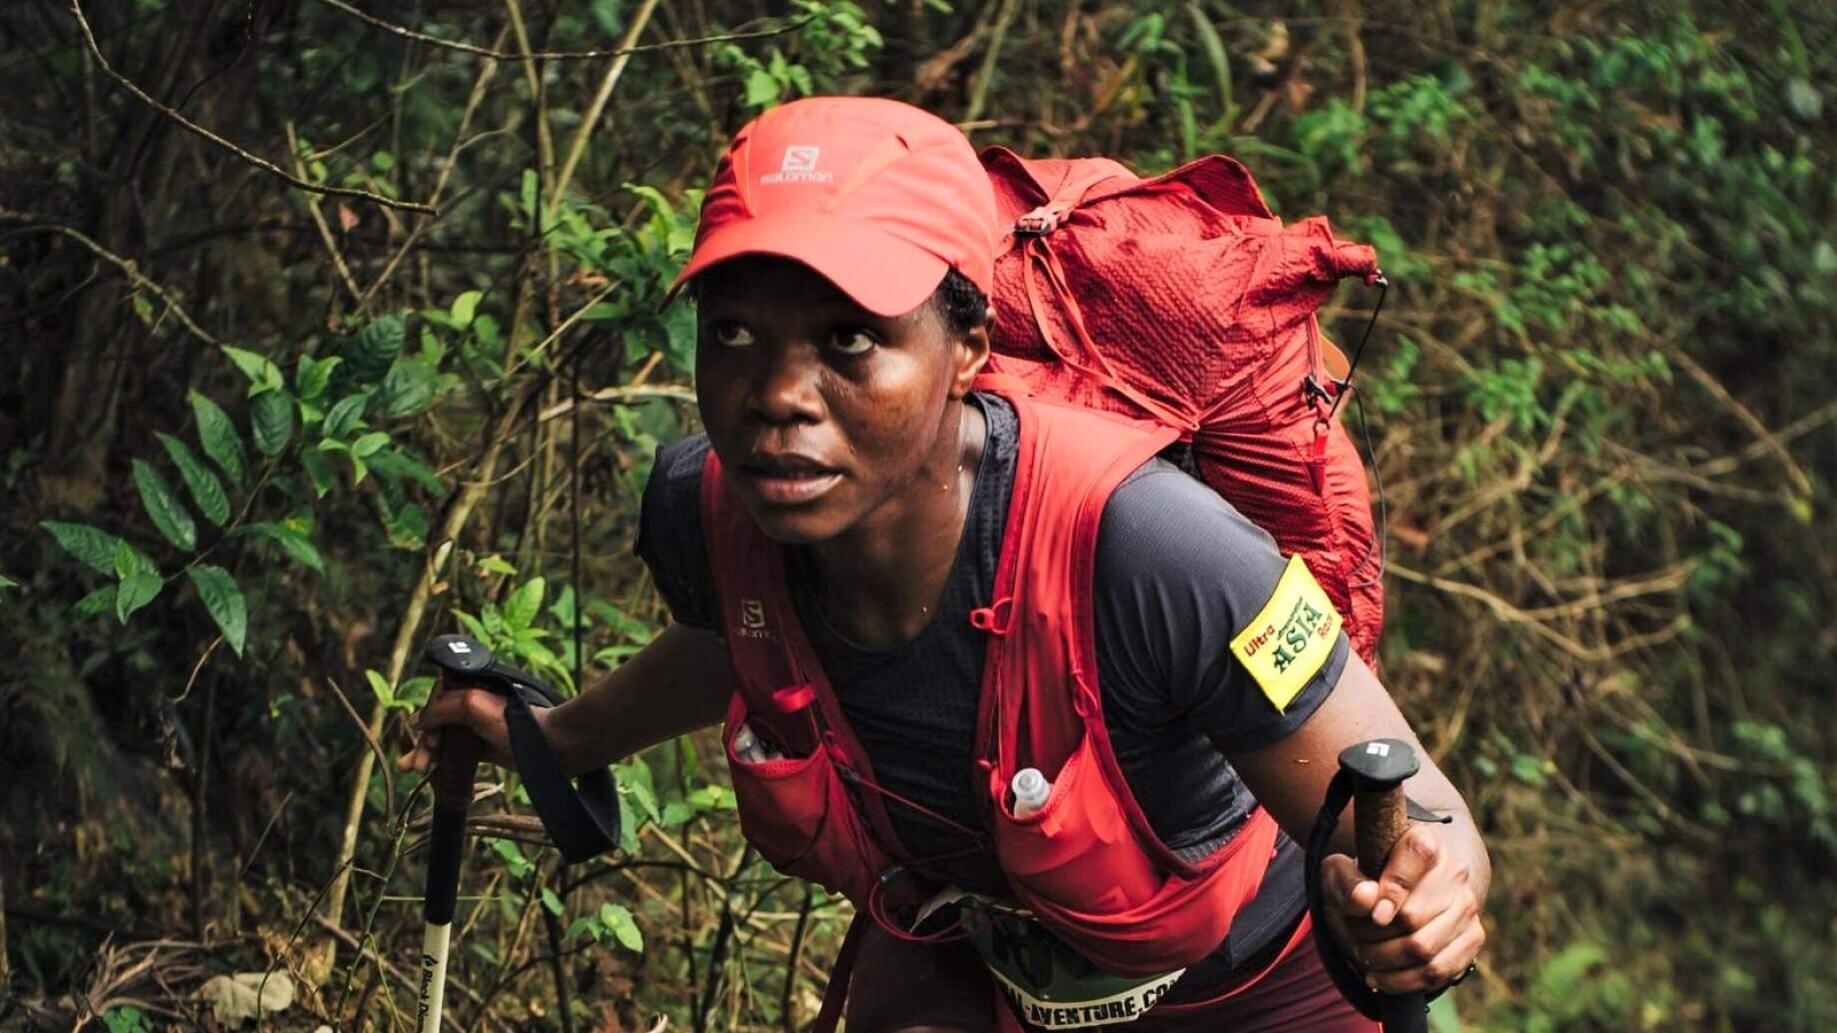 Nontuthuko Mgabhi in action during the  Ultra Asia race in Vietnam